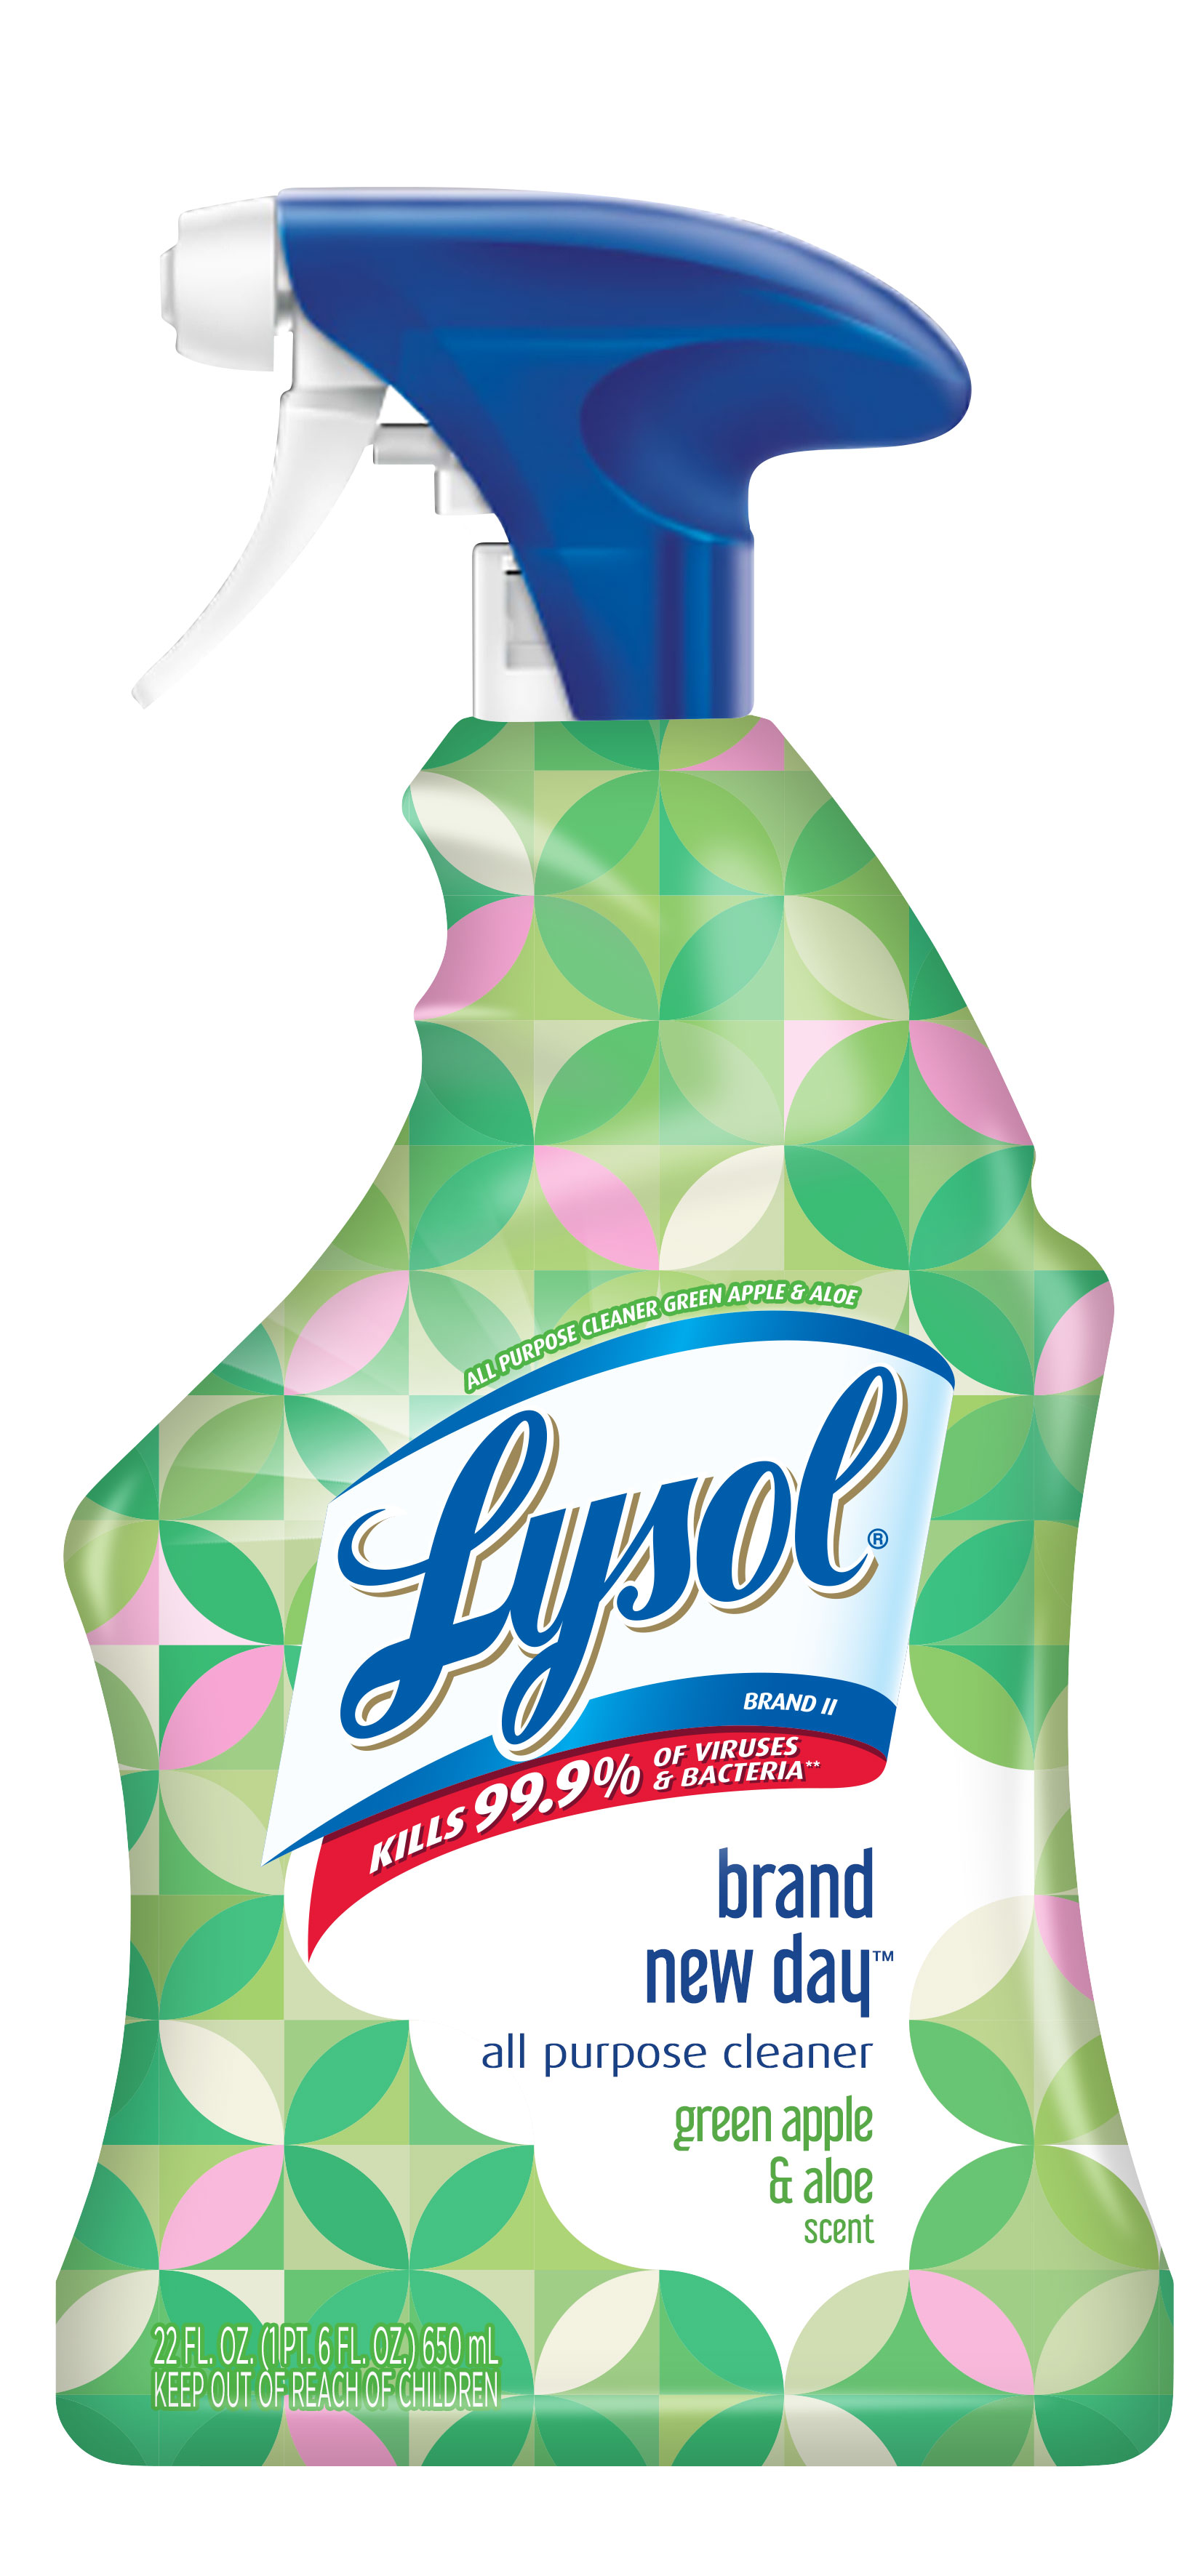 LYSOL® All Purpose Cleaner - Brand New Day™ - Green Apple & Aloe (Discontinued Jan. 30, 2020)